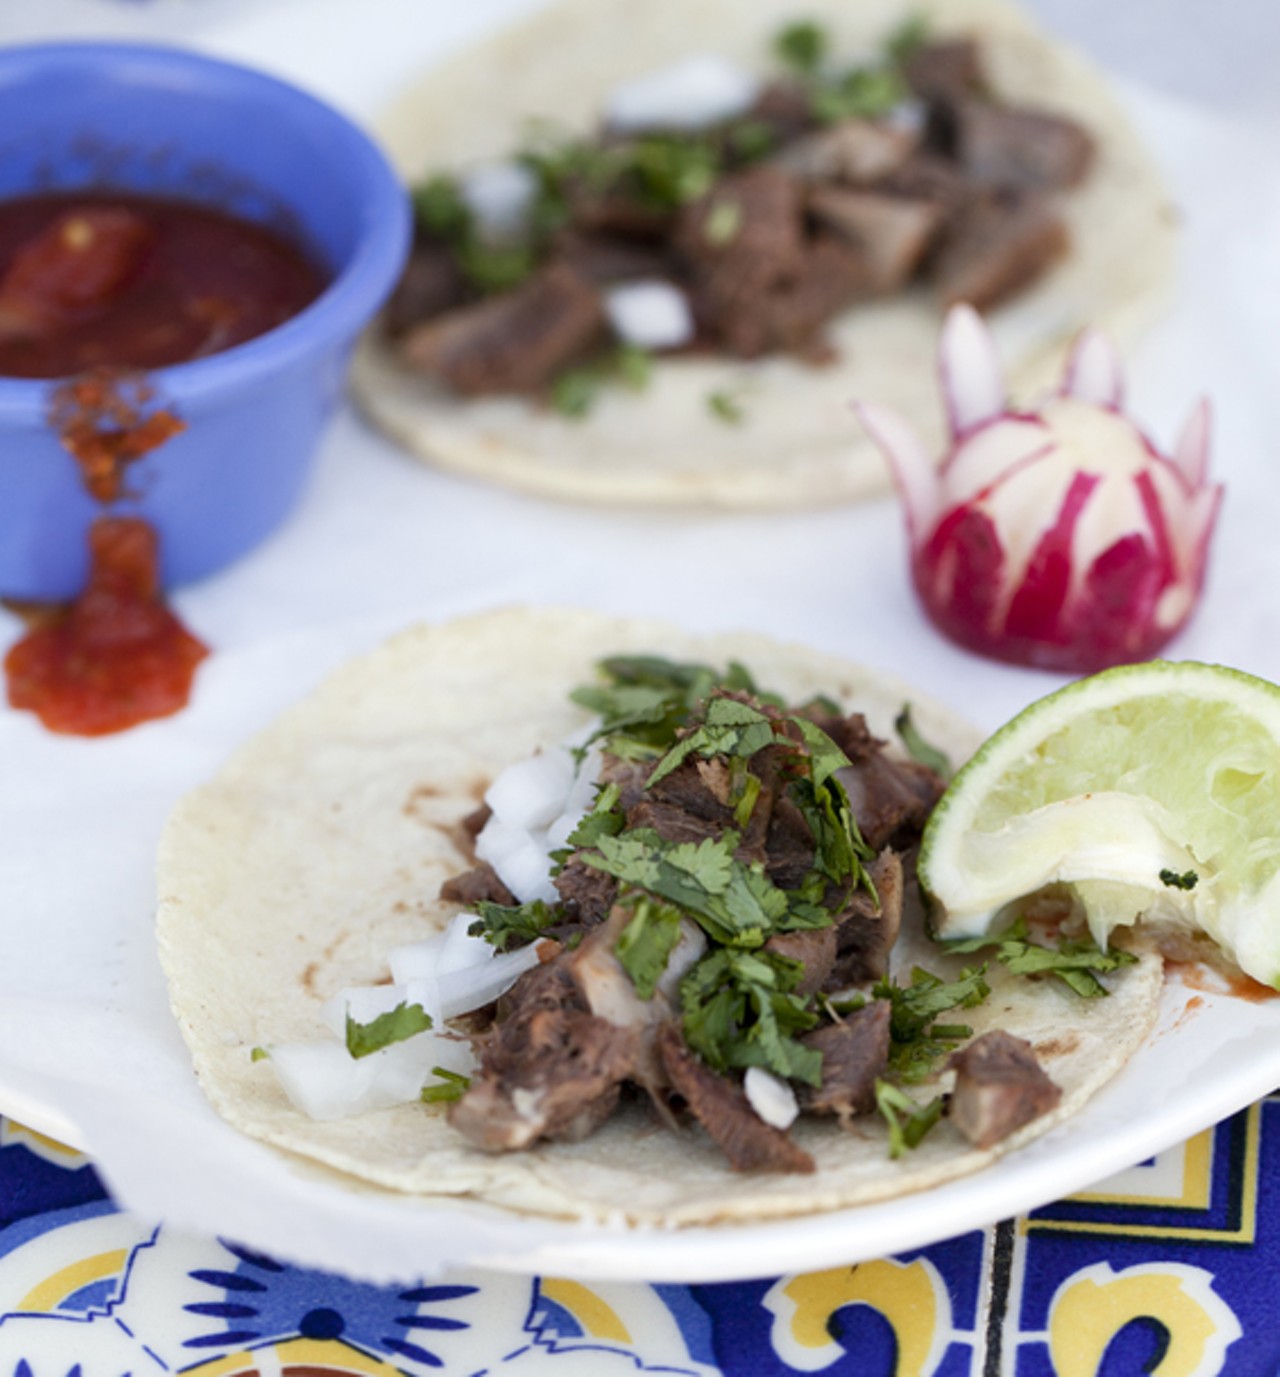 Street Tacos - small tacos with your choice of meat, in this case, beef tongue.